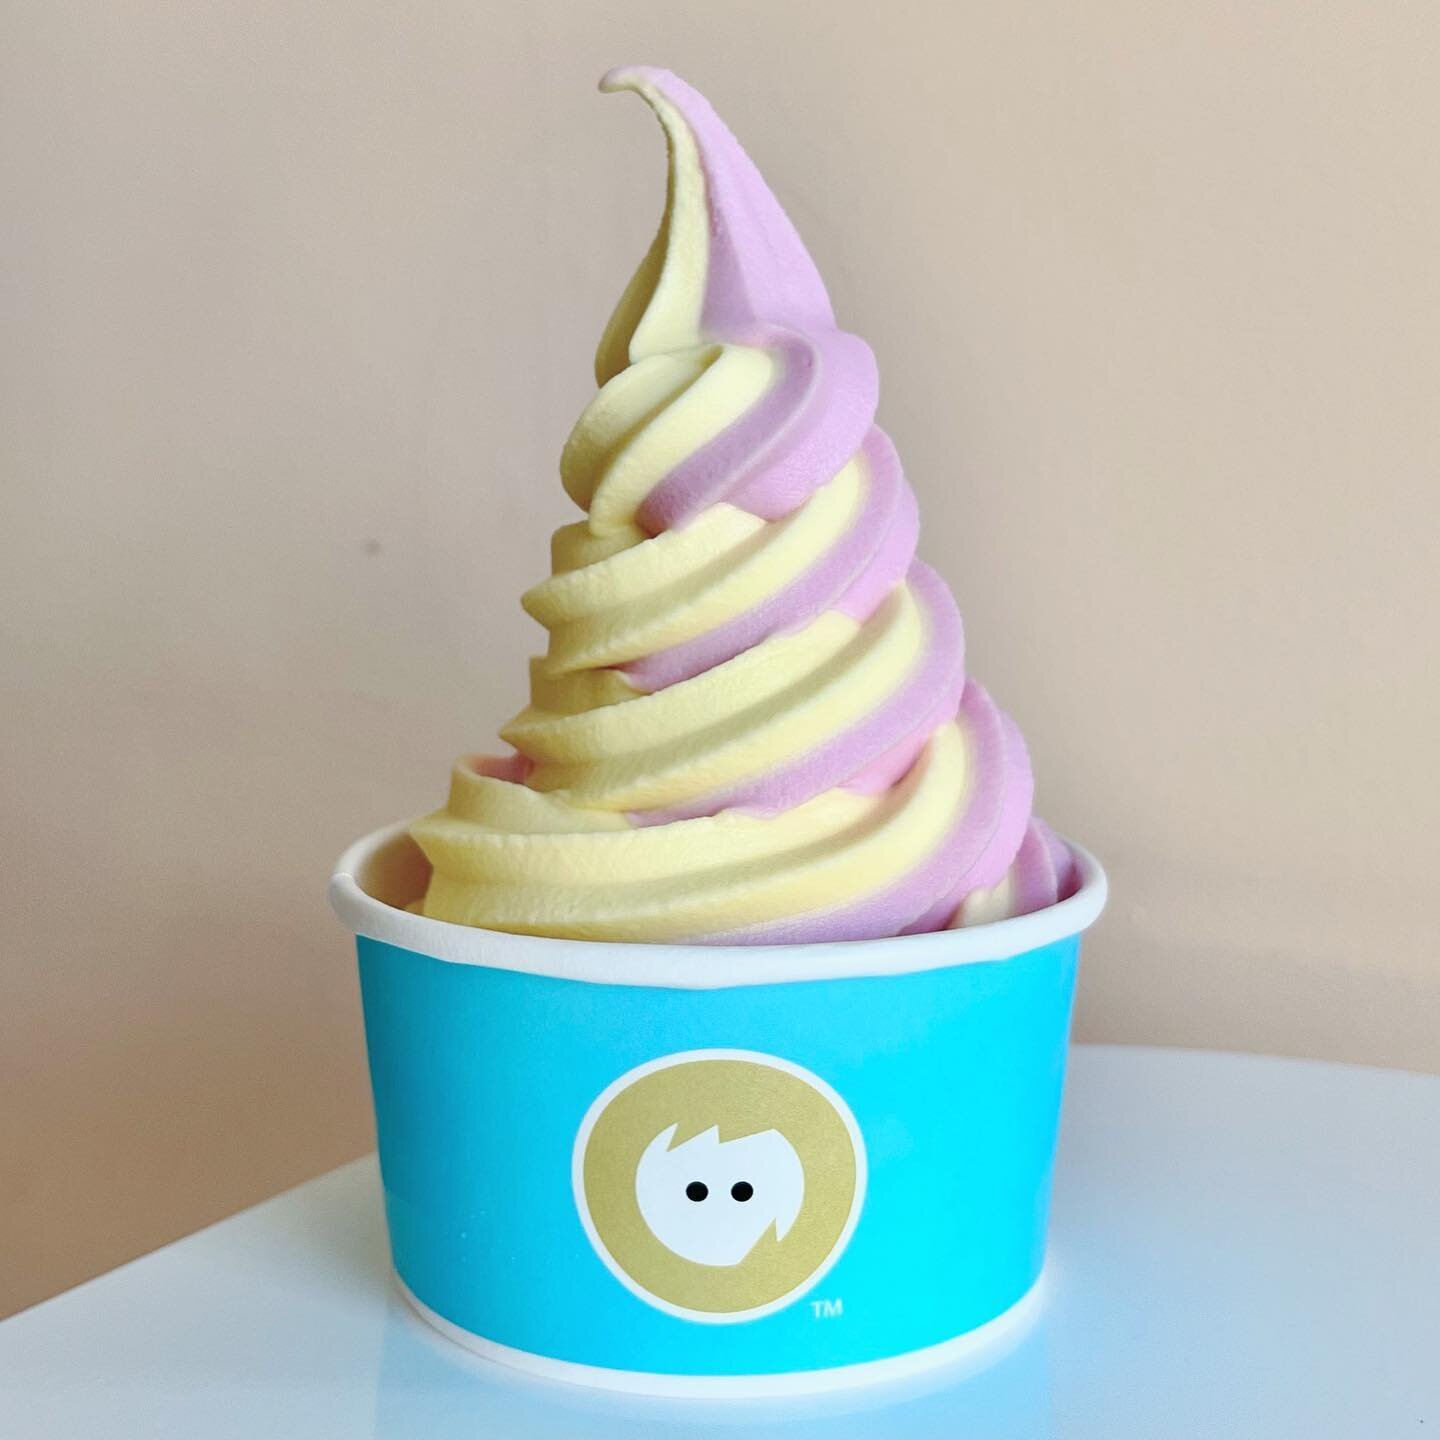 Eastlake now swirling pineapple dole whip and watermelon softie 🍍🍉🍦. Current softie flavors for June- Convoy (vanilla/ube) Del Mar (vanilla/chocolate/ube/pineapple dole whip) Eastlake (vanilla/ube/pineapple dole whip/watermelon)